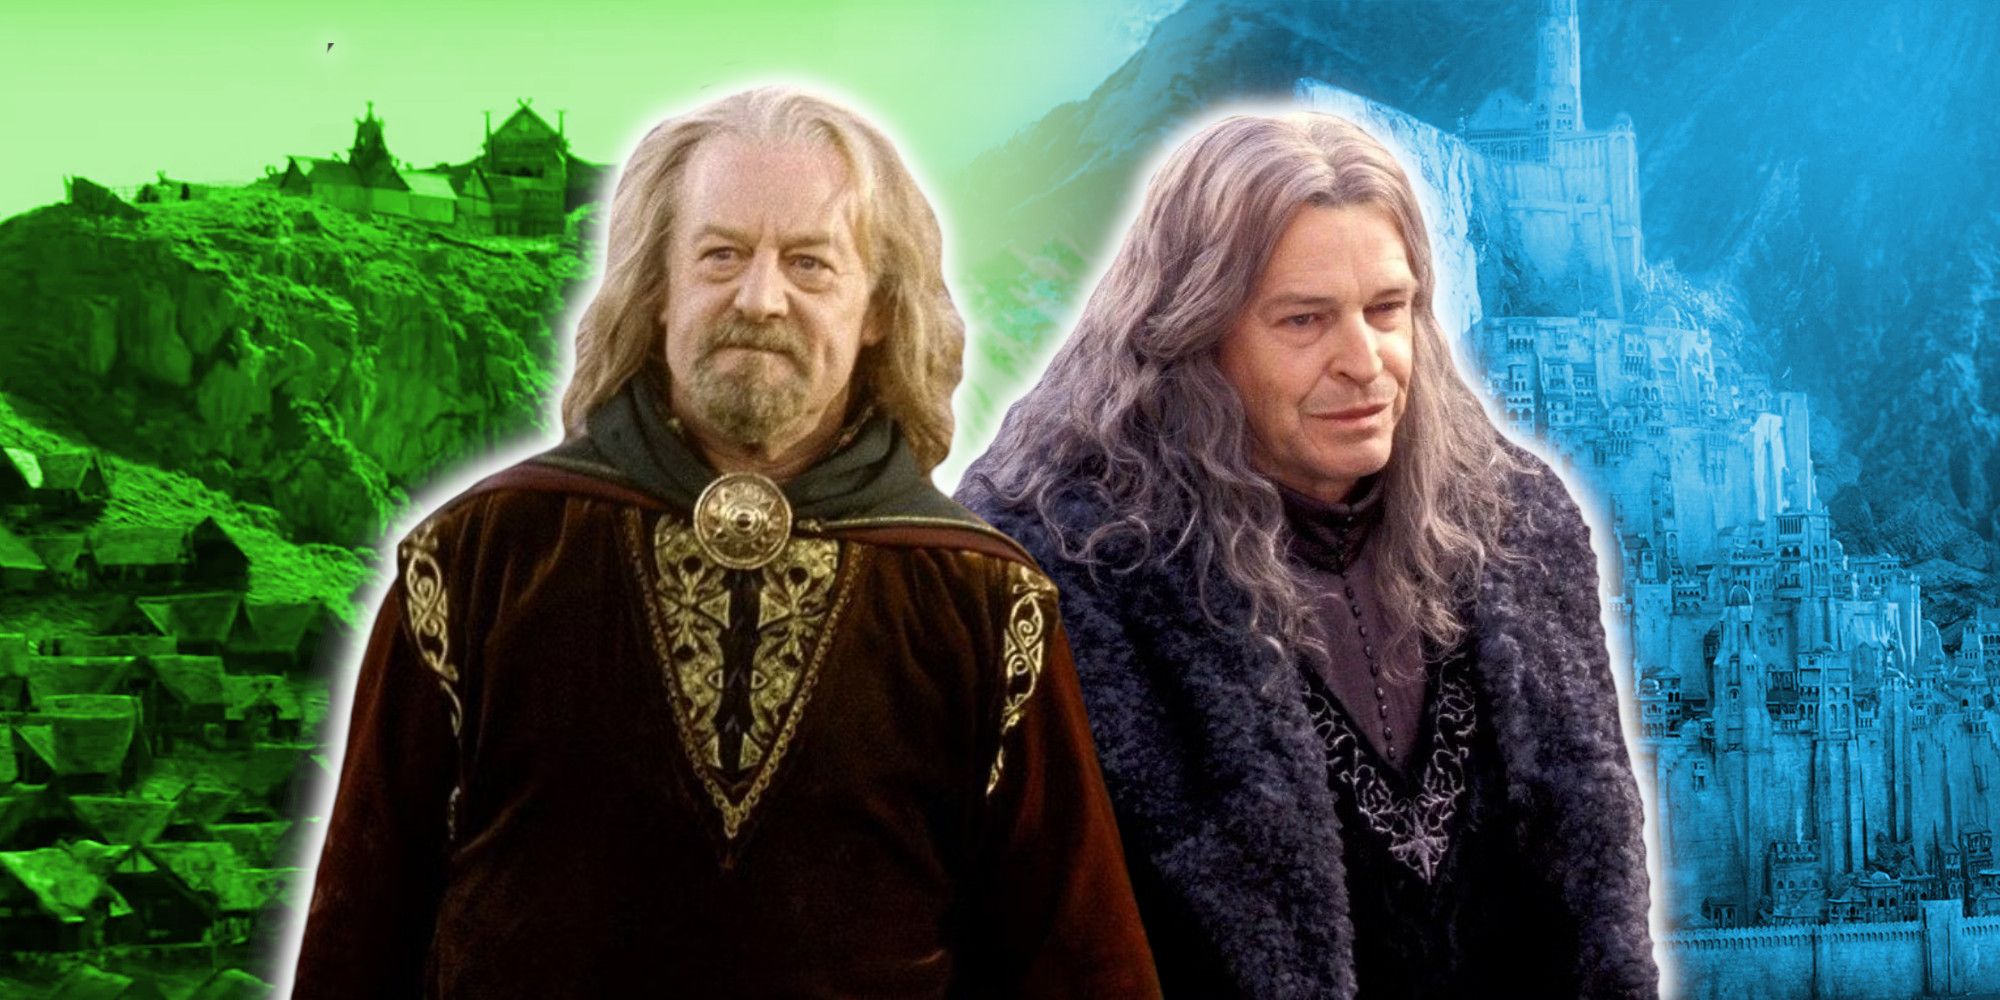 Theoden in front of Edoras and Denethor in front of Minas Tirith from The Lord of the Rings